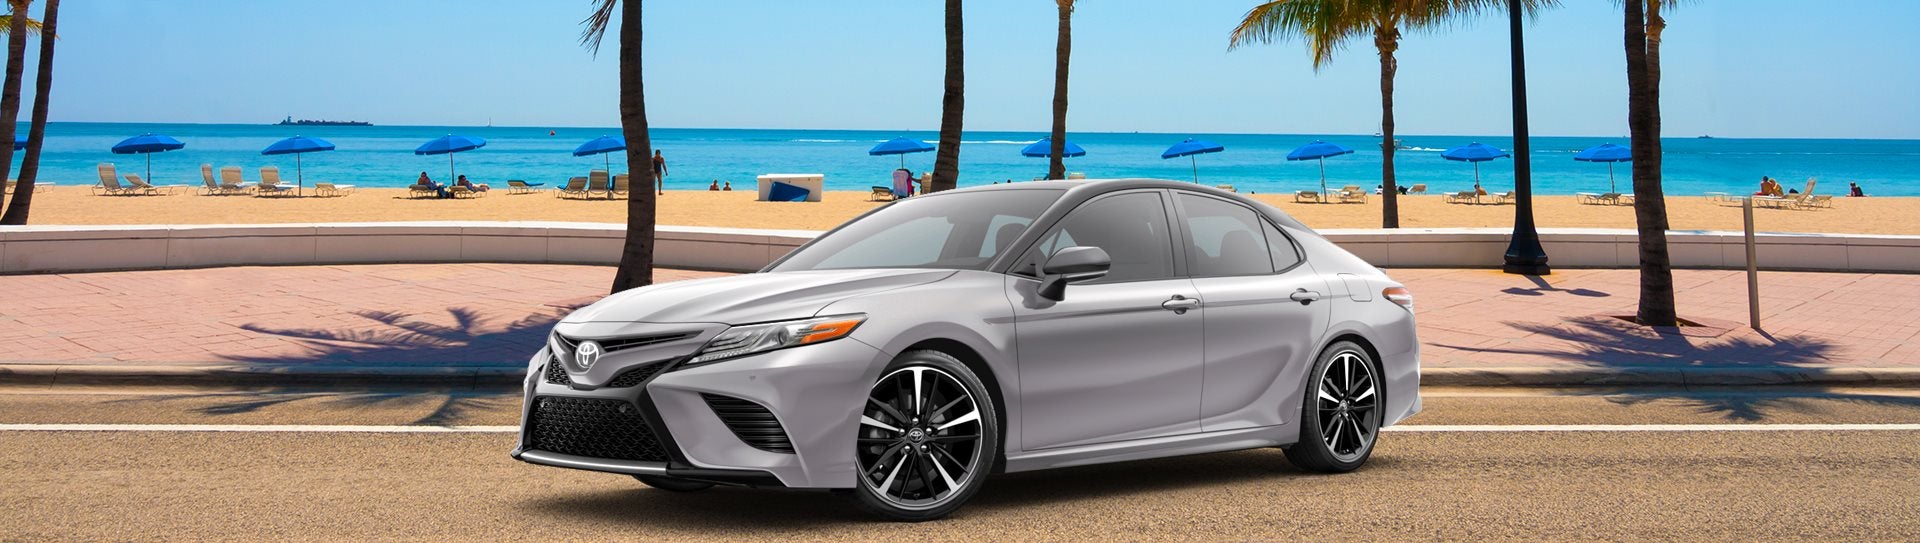 2018 Toyota Camry vs Competition